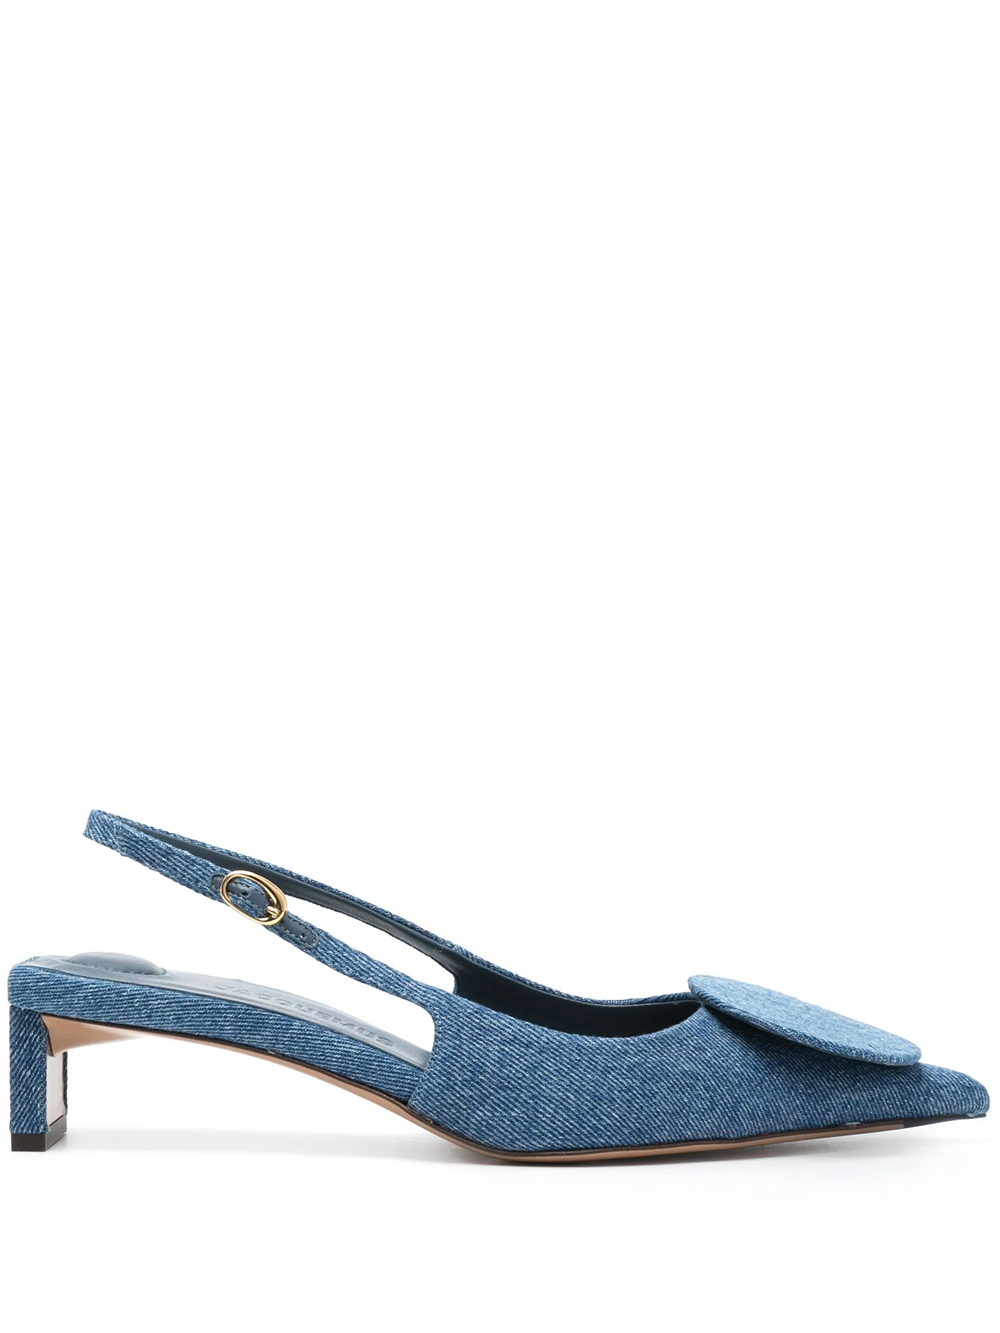 JACQUEMUS PUMPS WITH 40MM BACK STRAP